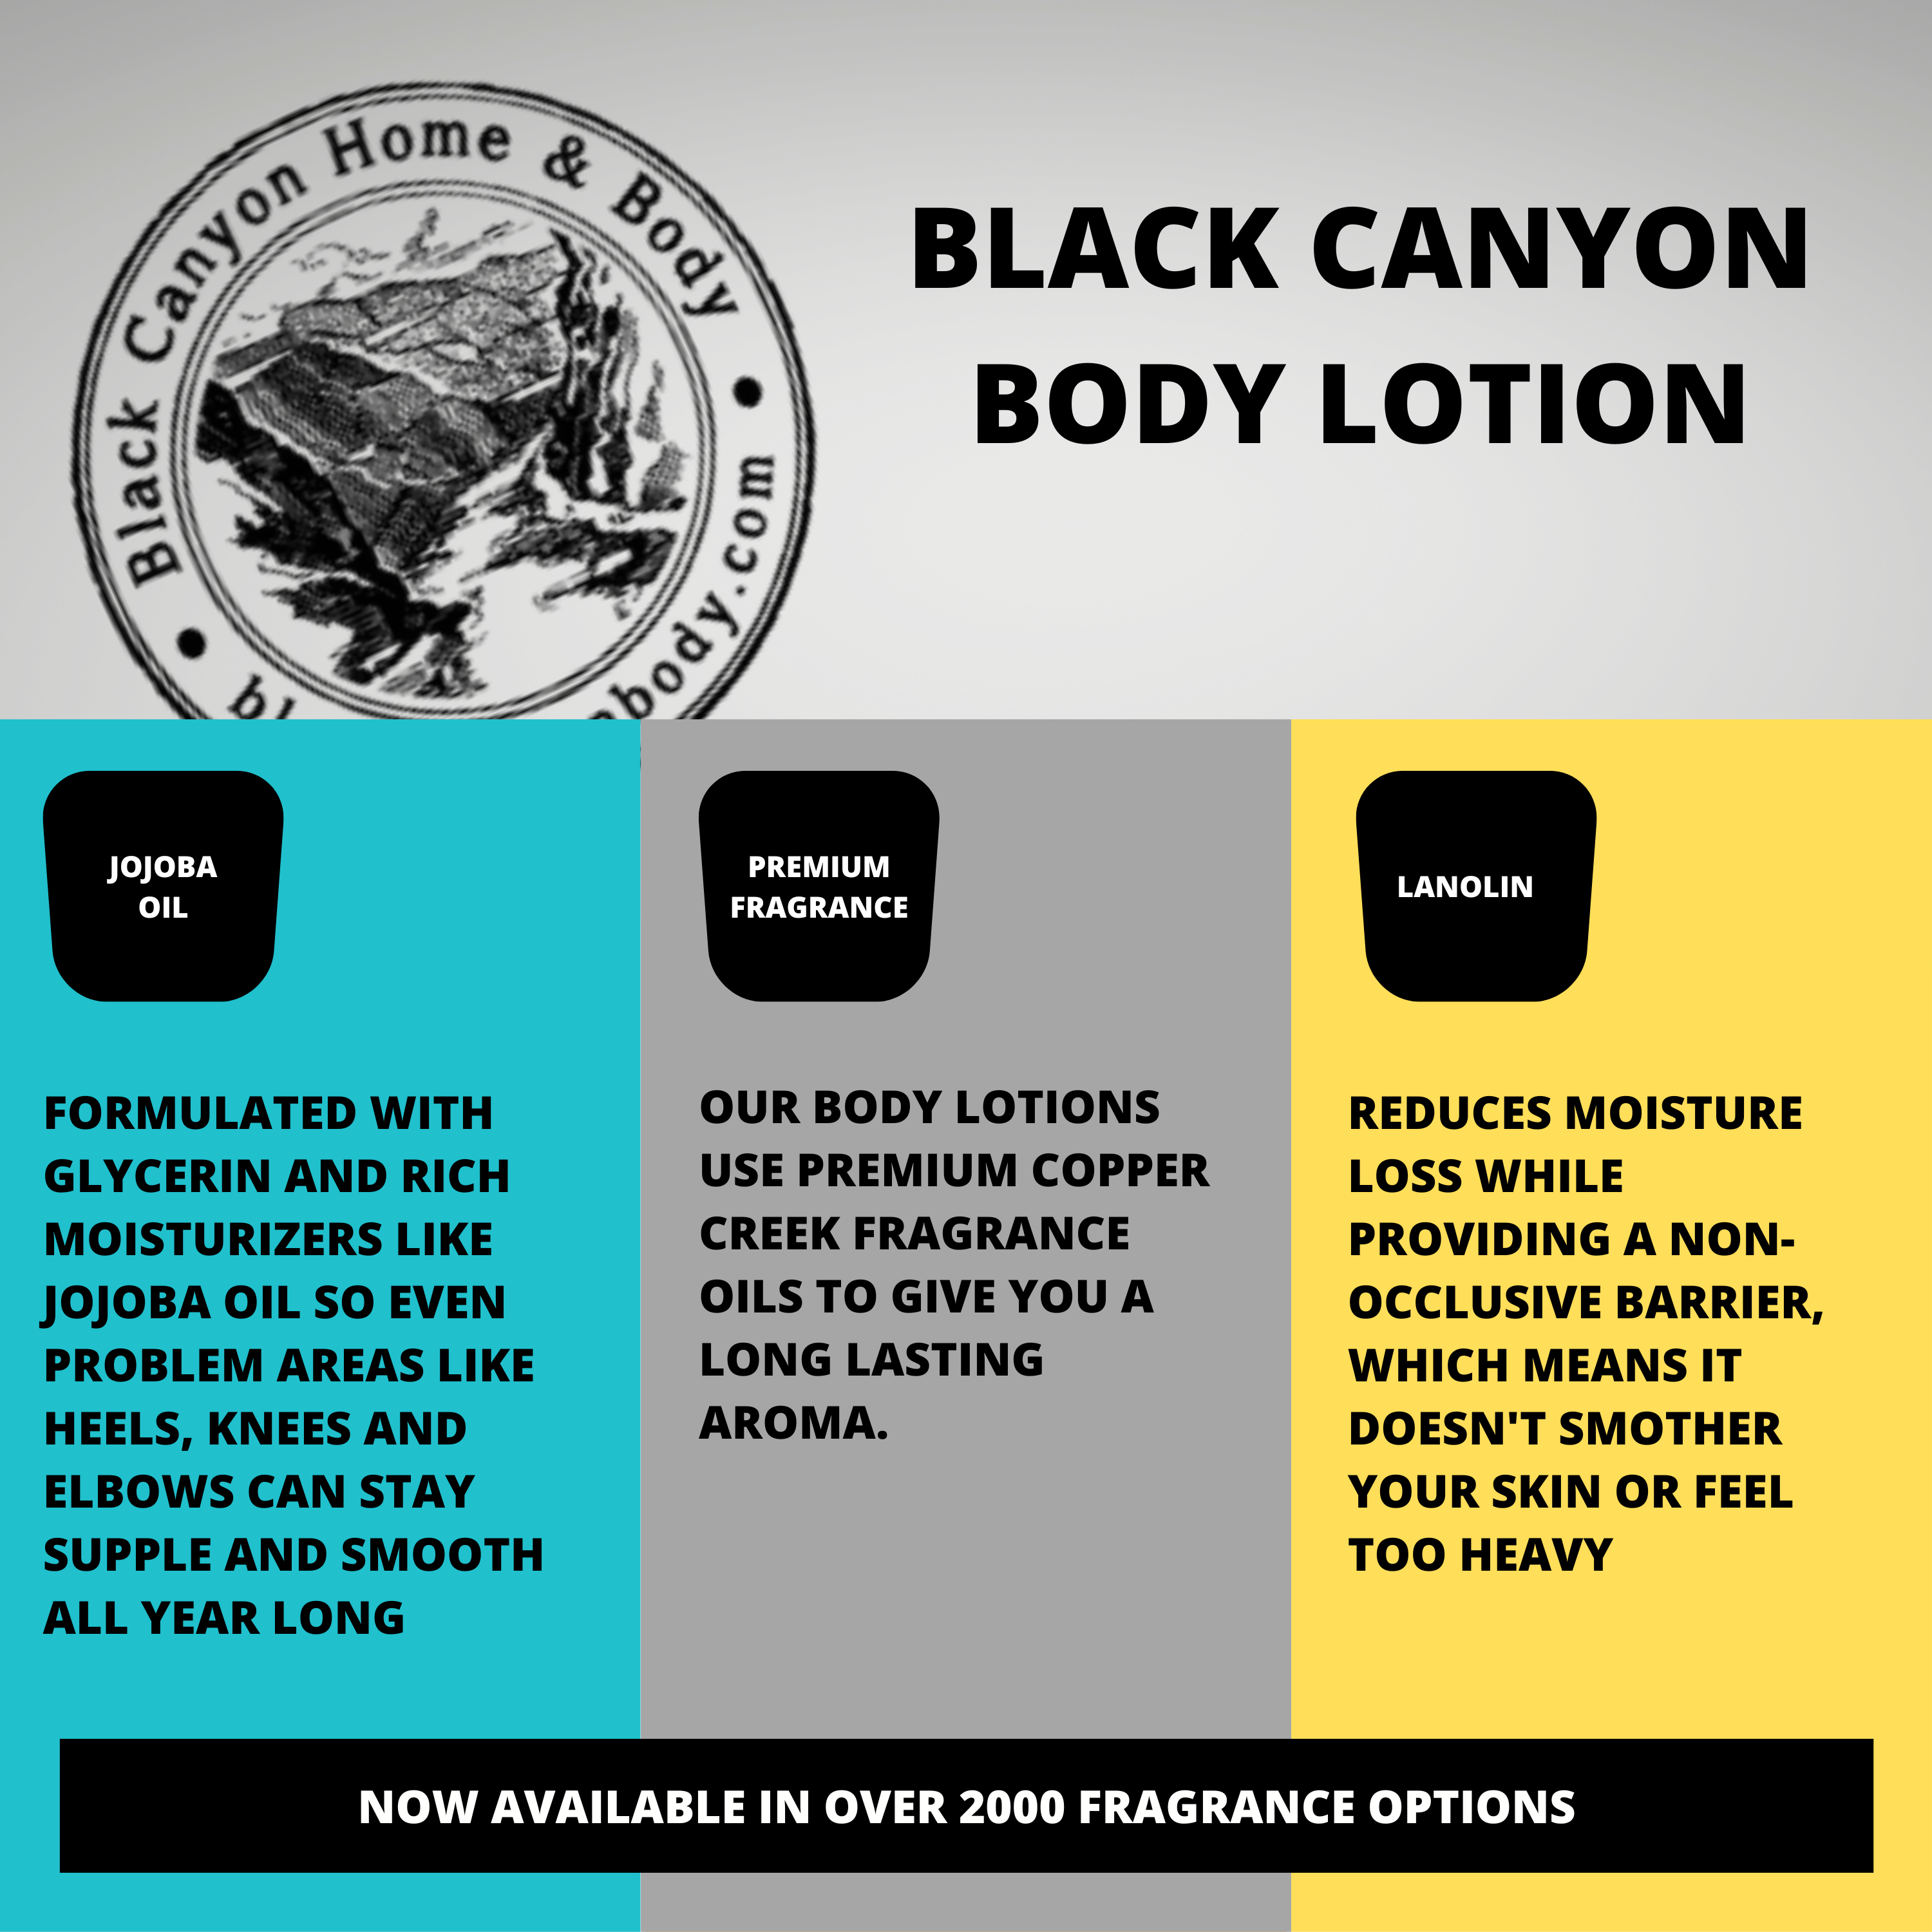 Black Canyon Simply Smitten Scented Luxury Body Lotion with Lanolin and Jojoba Oil